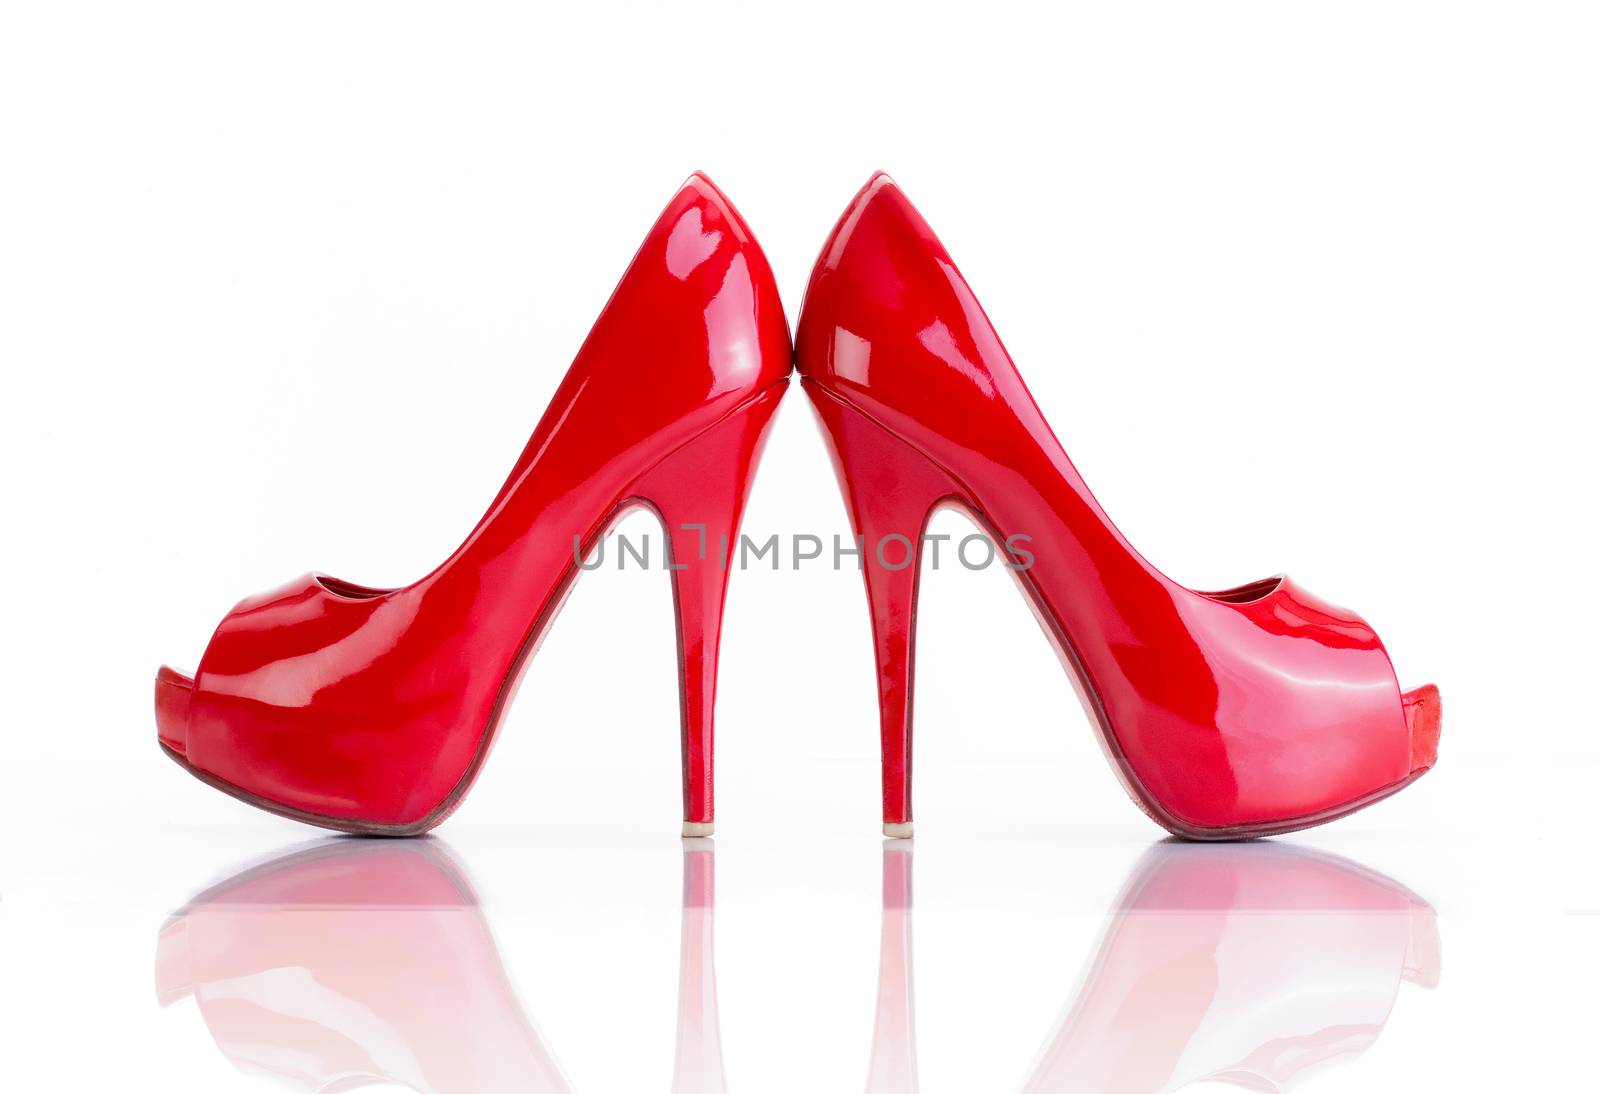 Pair of Red High Shoes - Isolated on White.